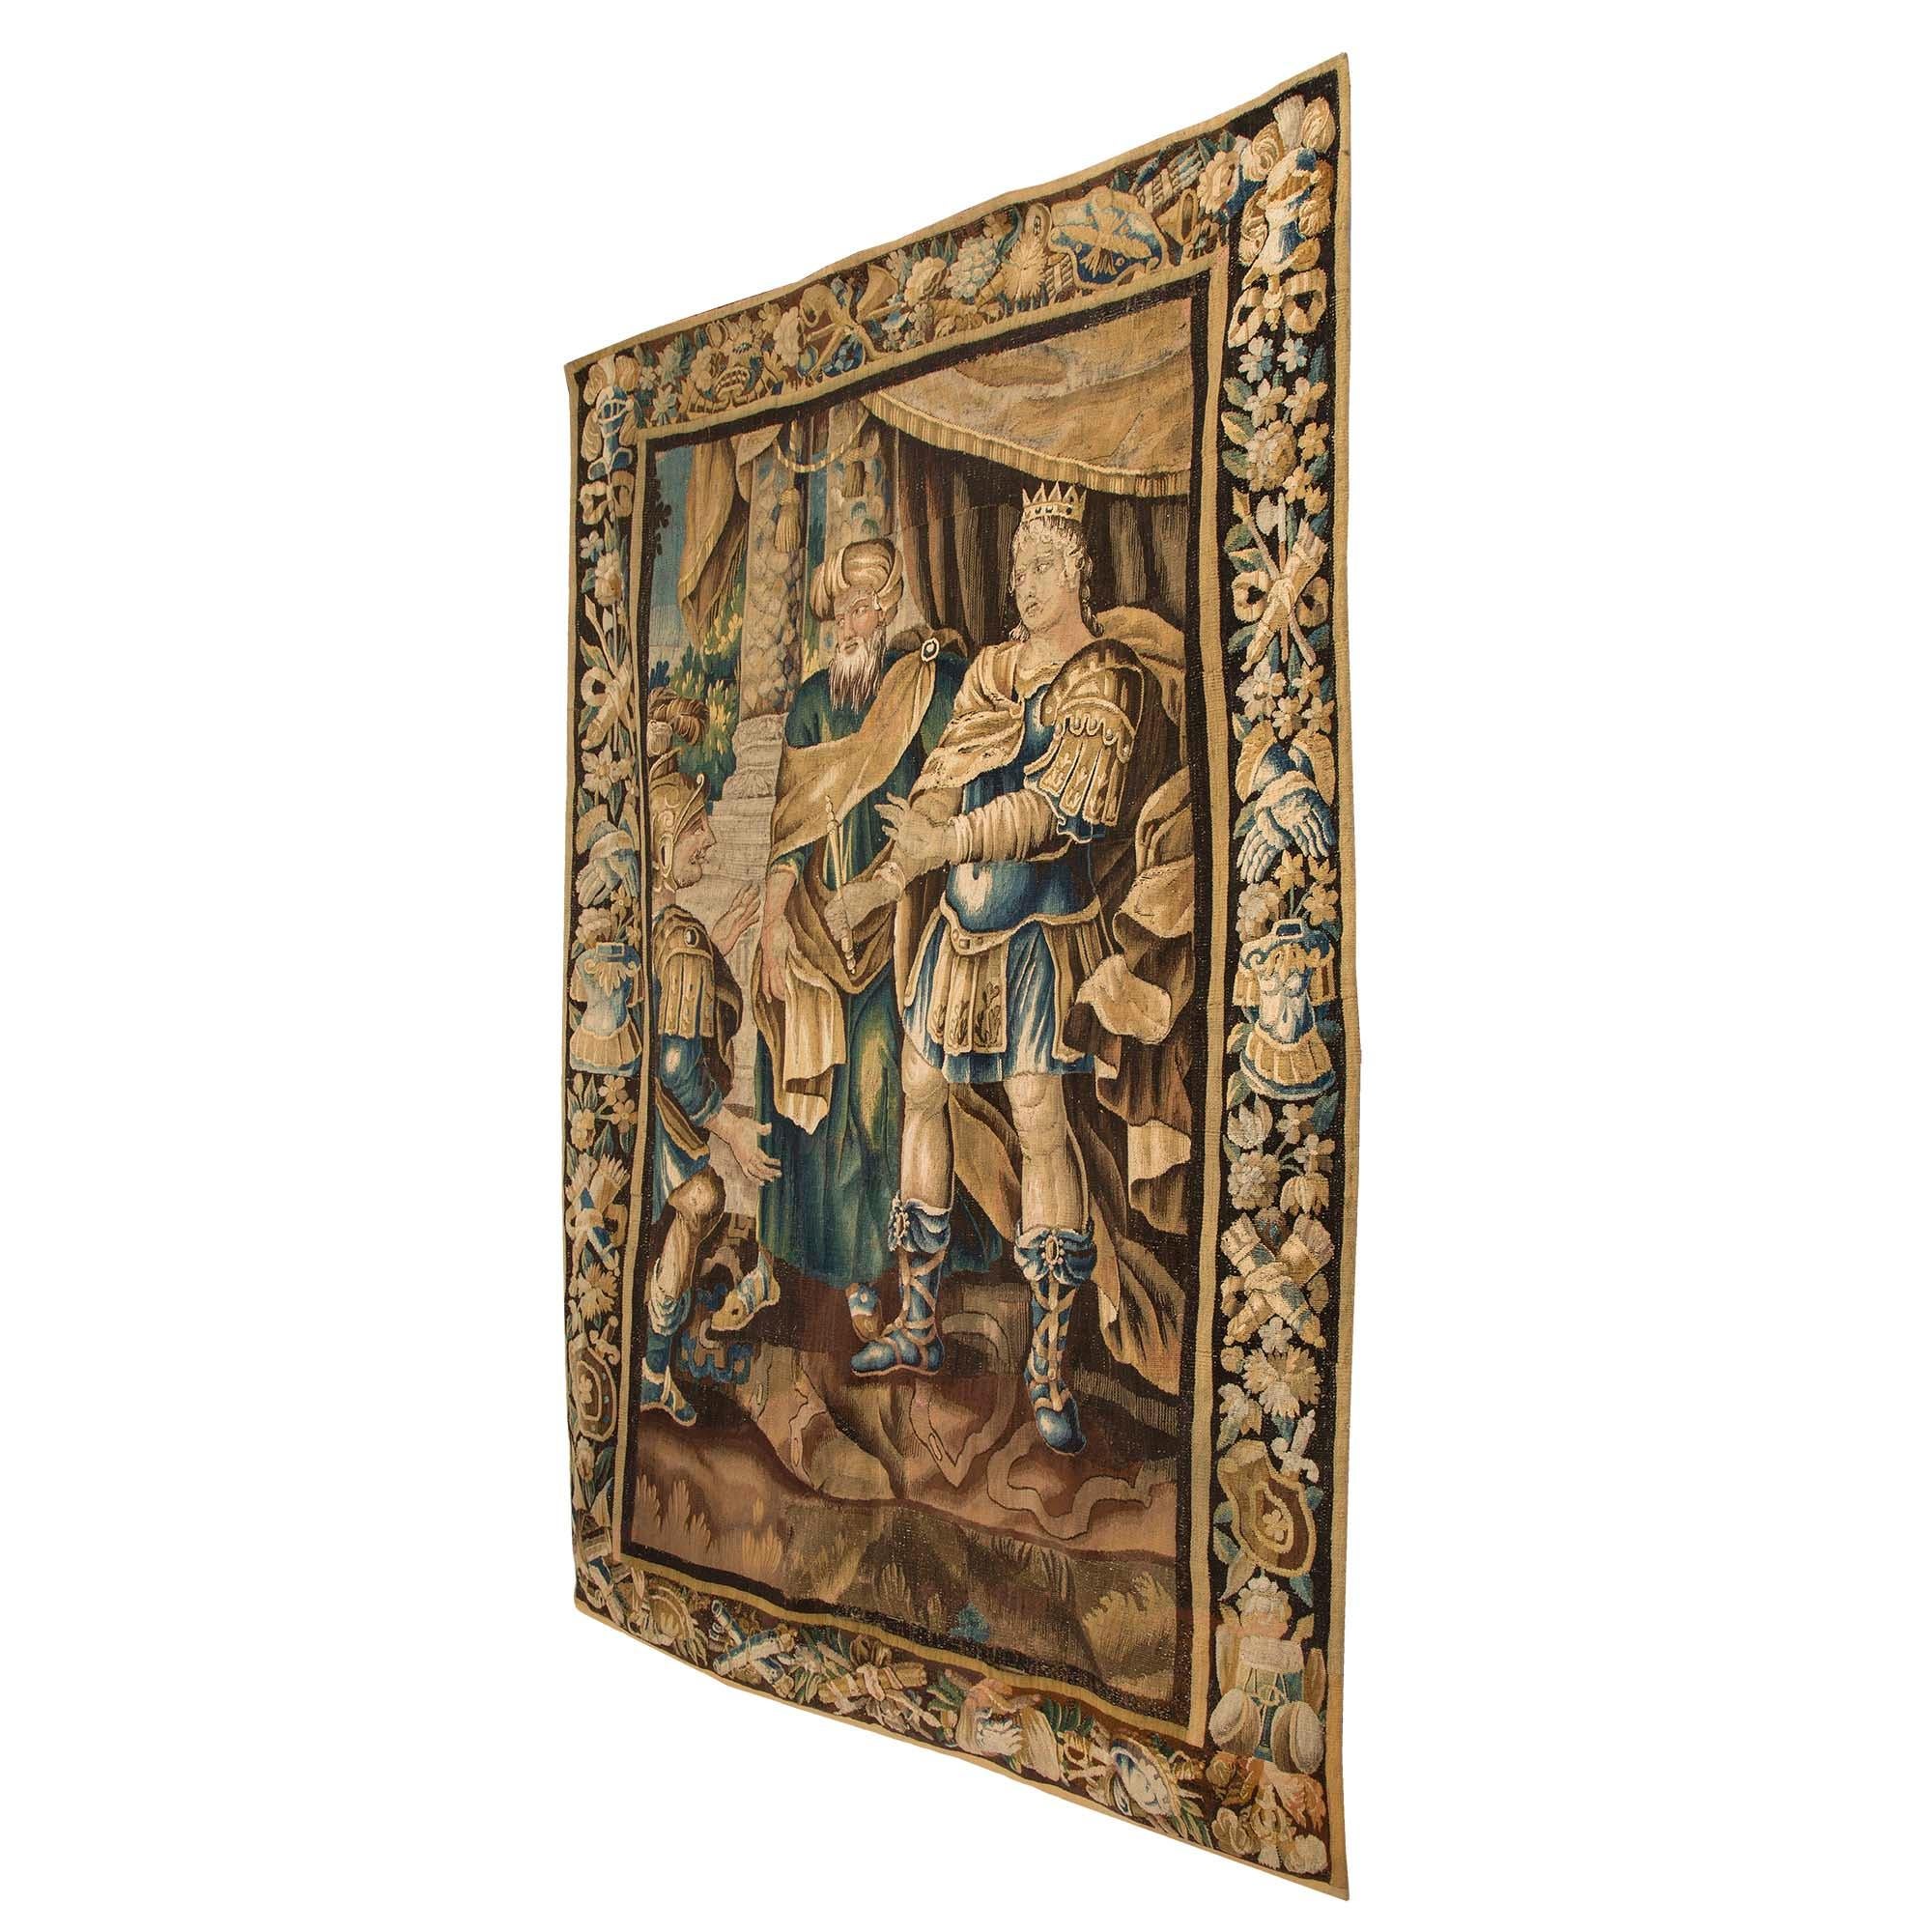 A large scale and very high quality French 18th century Aubusson tapestry likely depicting Alexander the Great, circa 1750. The border with suits of armor, helmets, shields, quivers and bows, all amidst a floral background. nnThe Aubusson tapestry